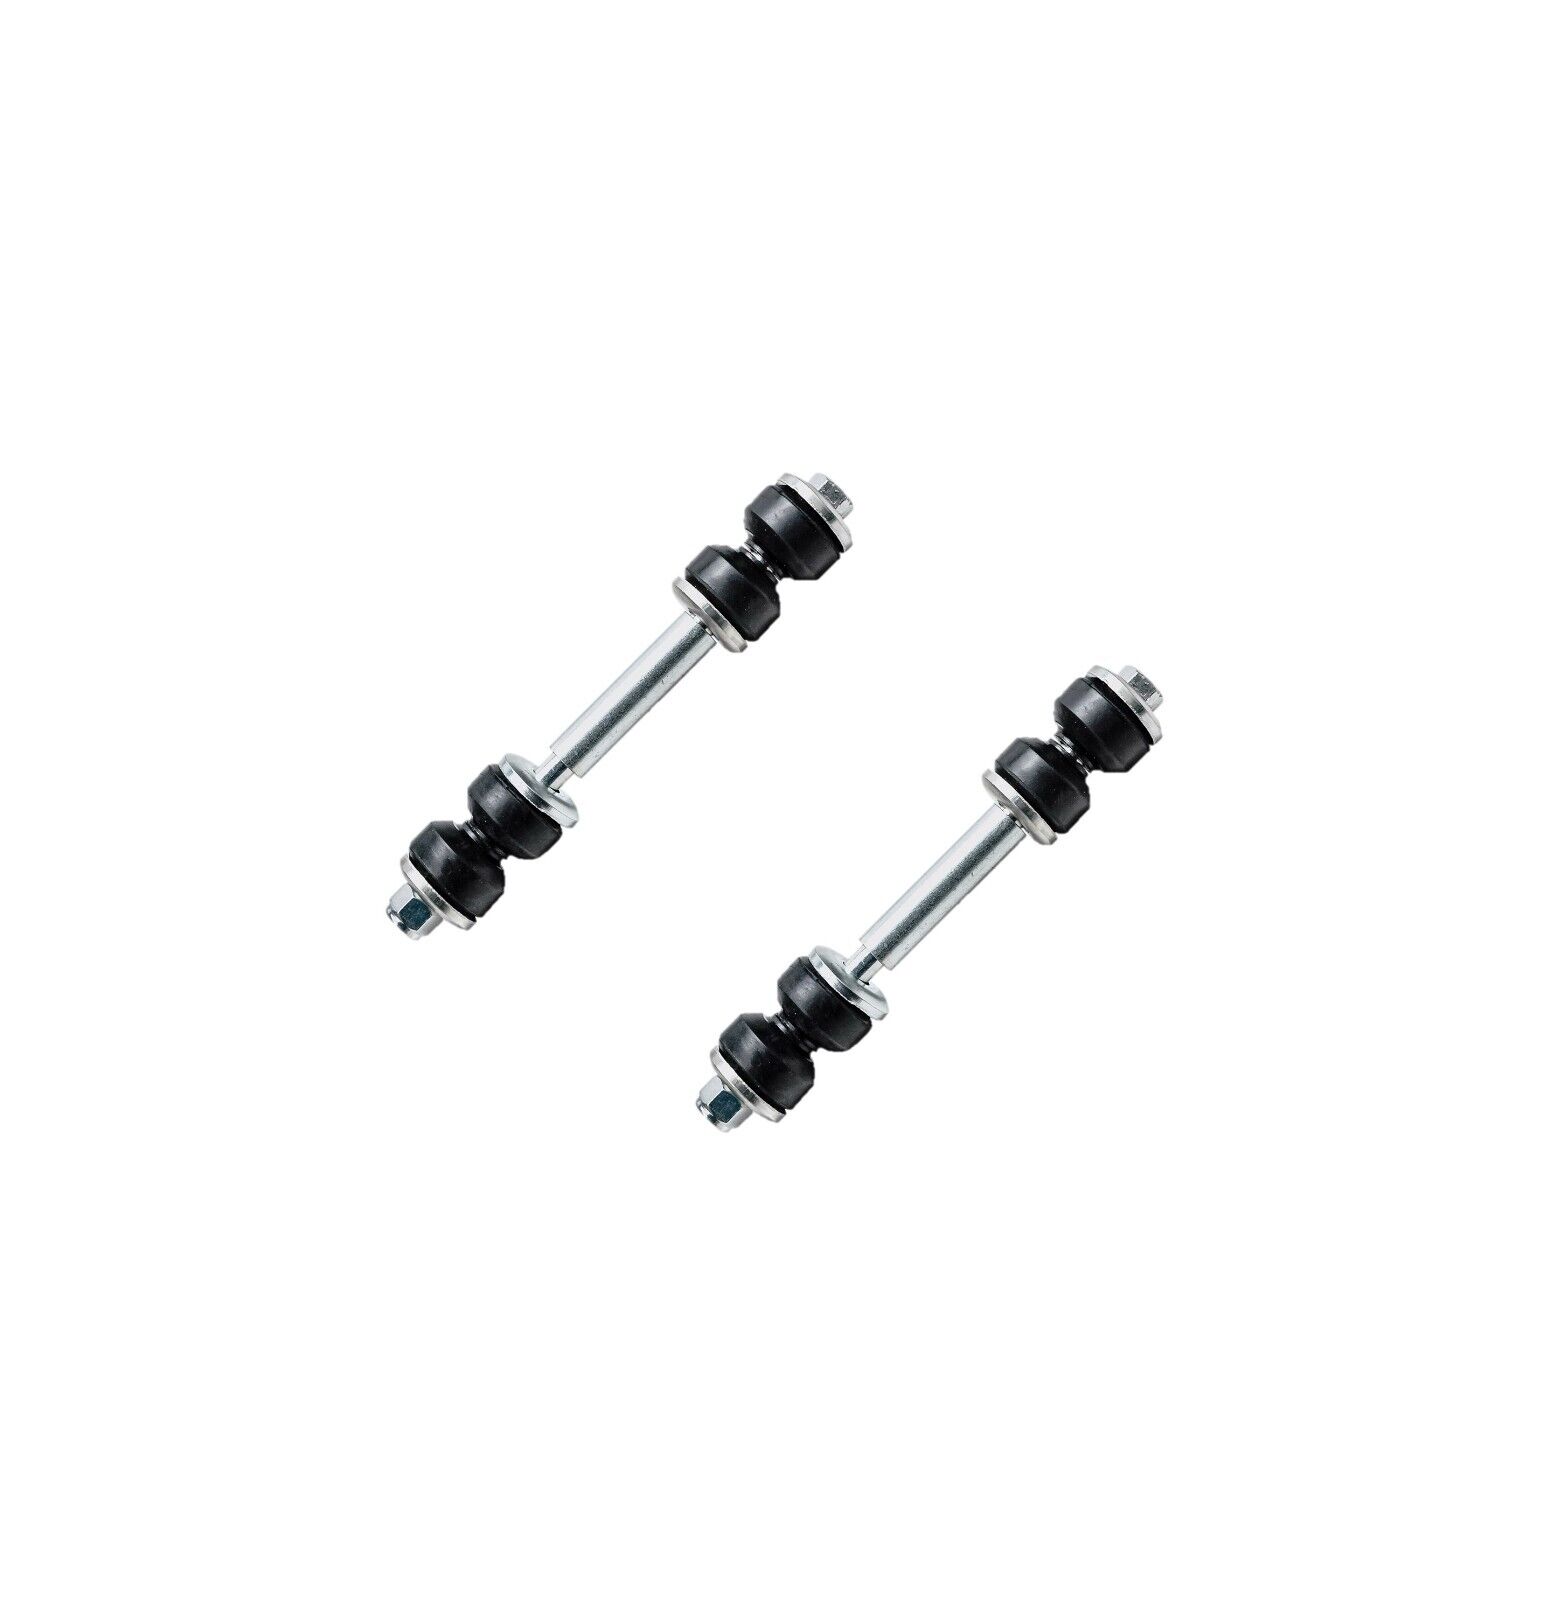 2 Pc Suspension Kit for Chevrolet & GMC Sway Bar End Links Made In USA